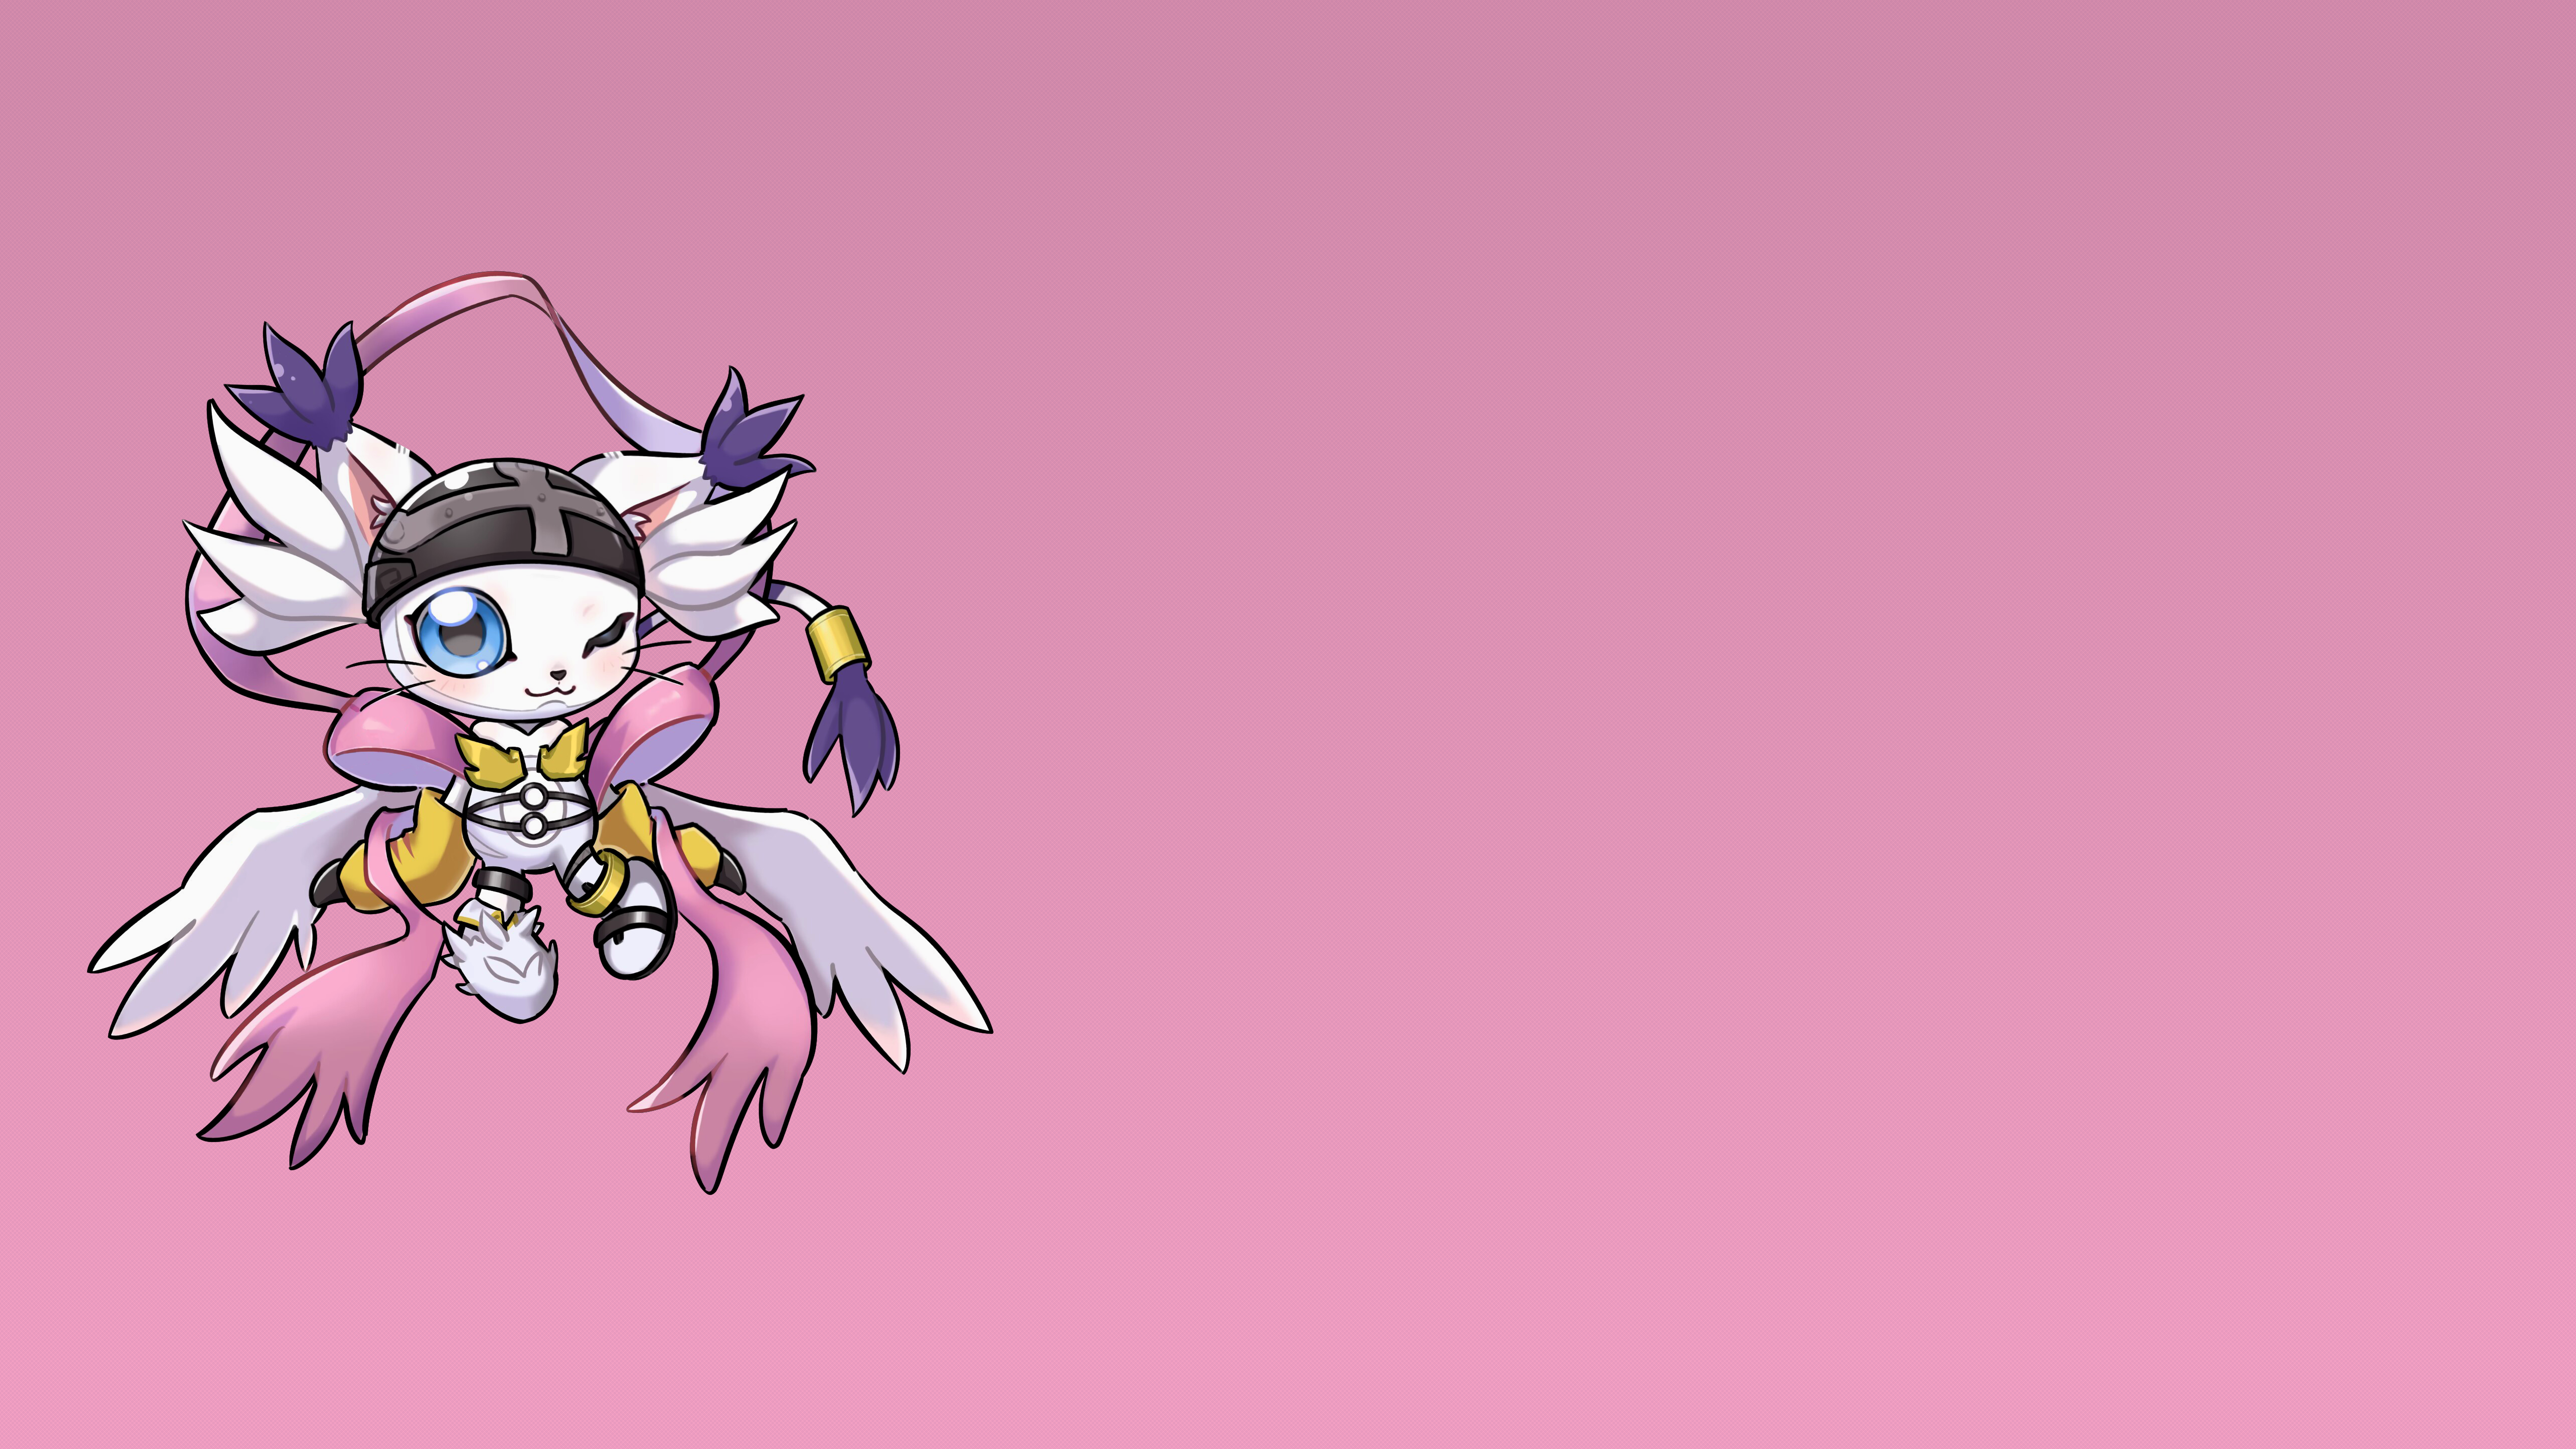 Anime 5120x2880 boots gloves blue eyes looking at viewer Digimon Gatomon angewomon animals claws costumes cosplay simple background ribbon angel wings Digimon Adventure cats helmet angel wings wink pink background